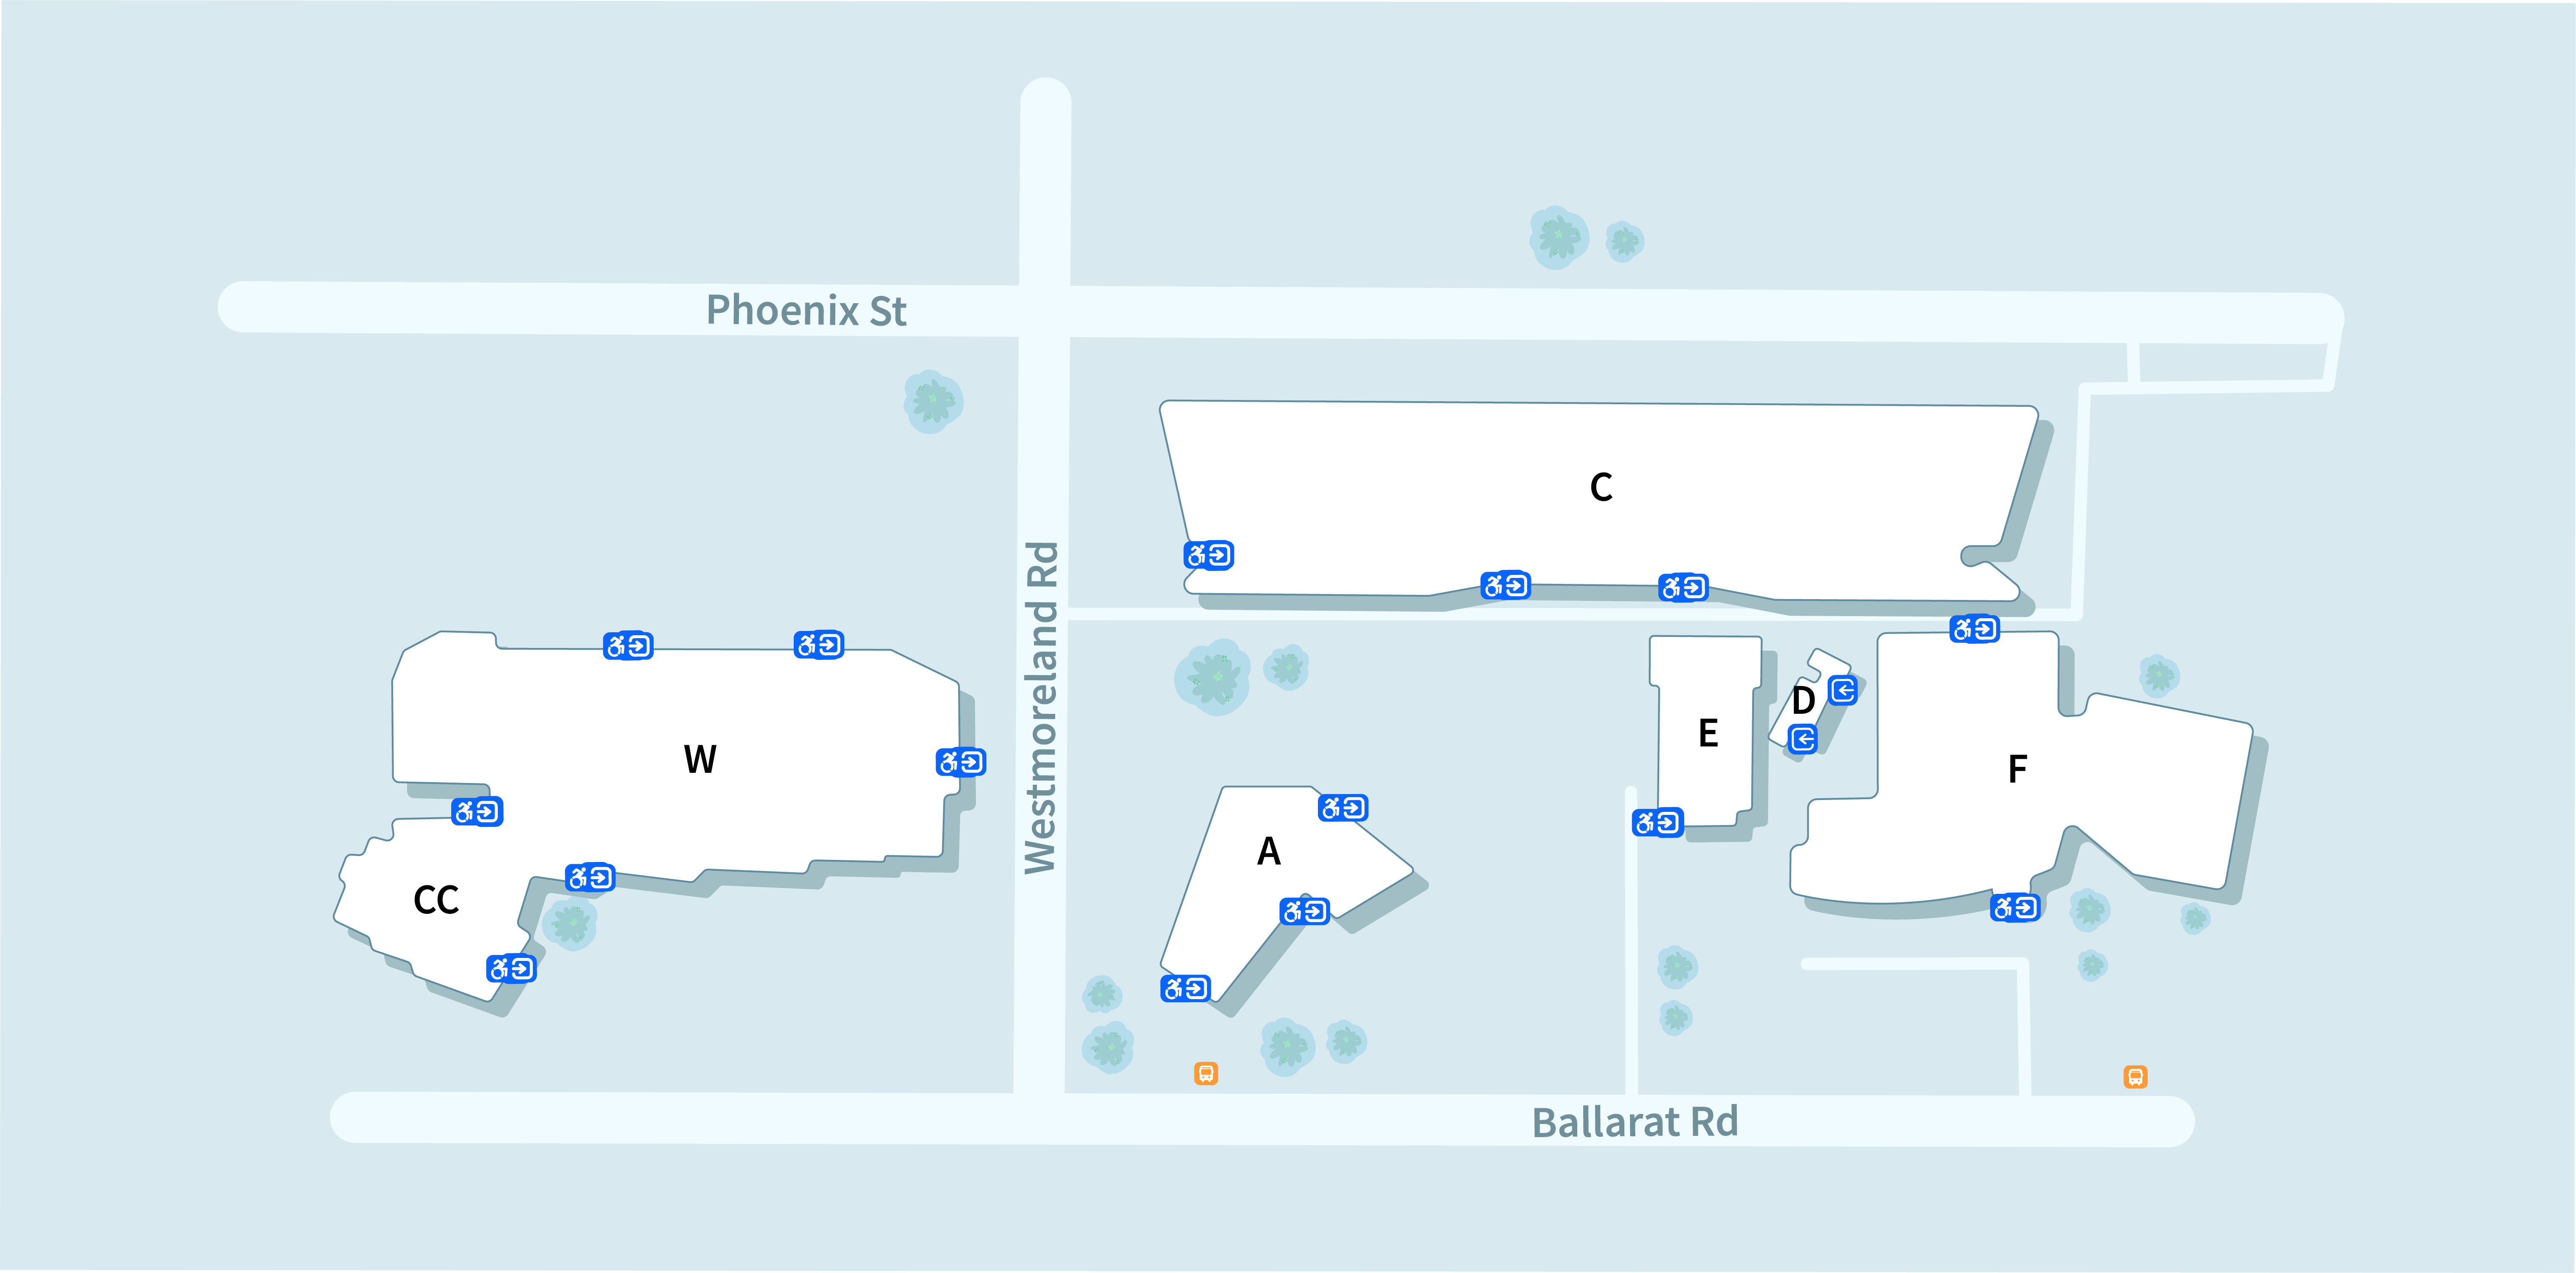 VU Sunshine Campus map showing the following buildings and their accessible entrances, from L-R: W, C, E, D, F. Westmoreland Rd separates Building W from the others.